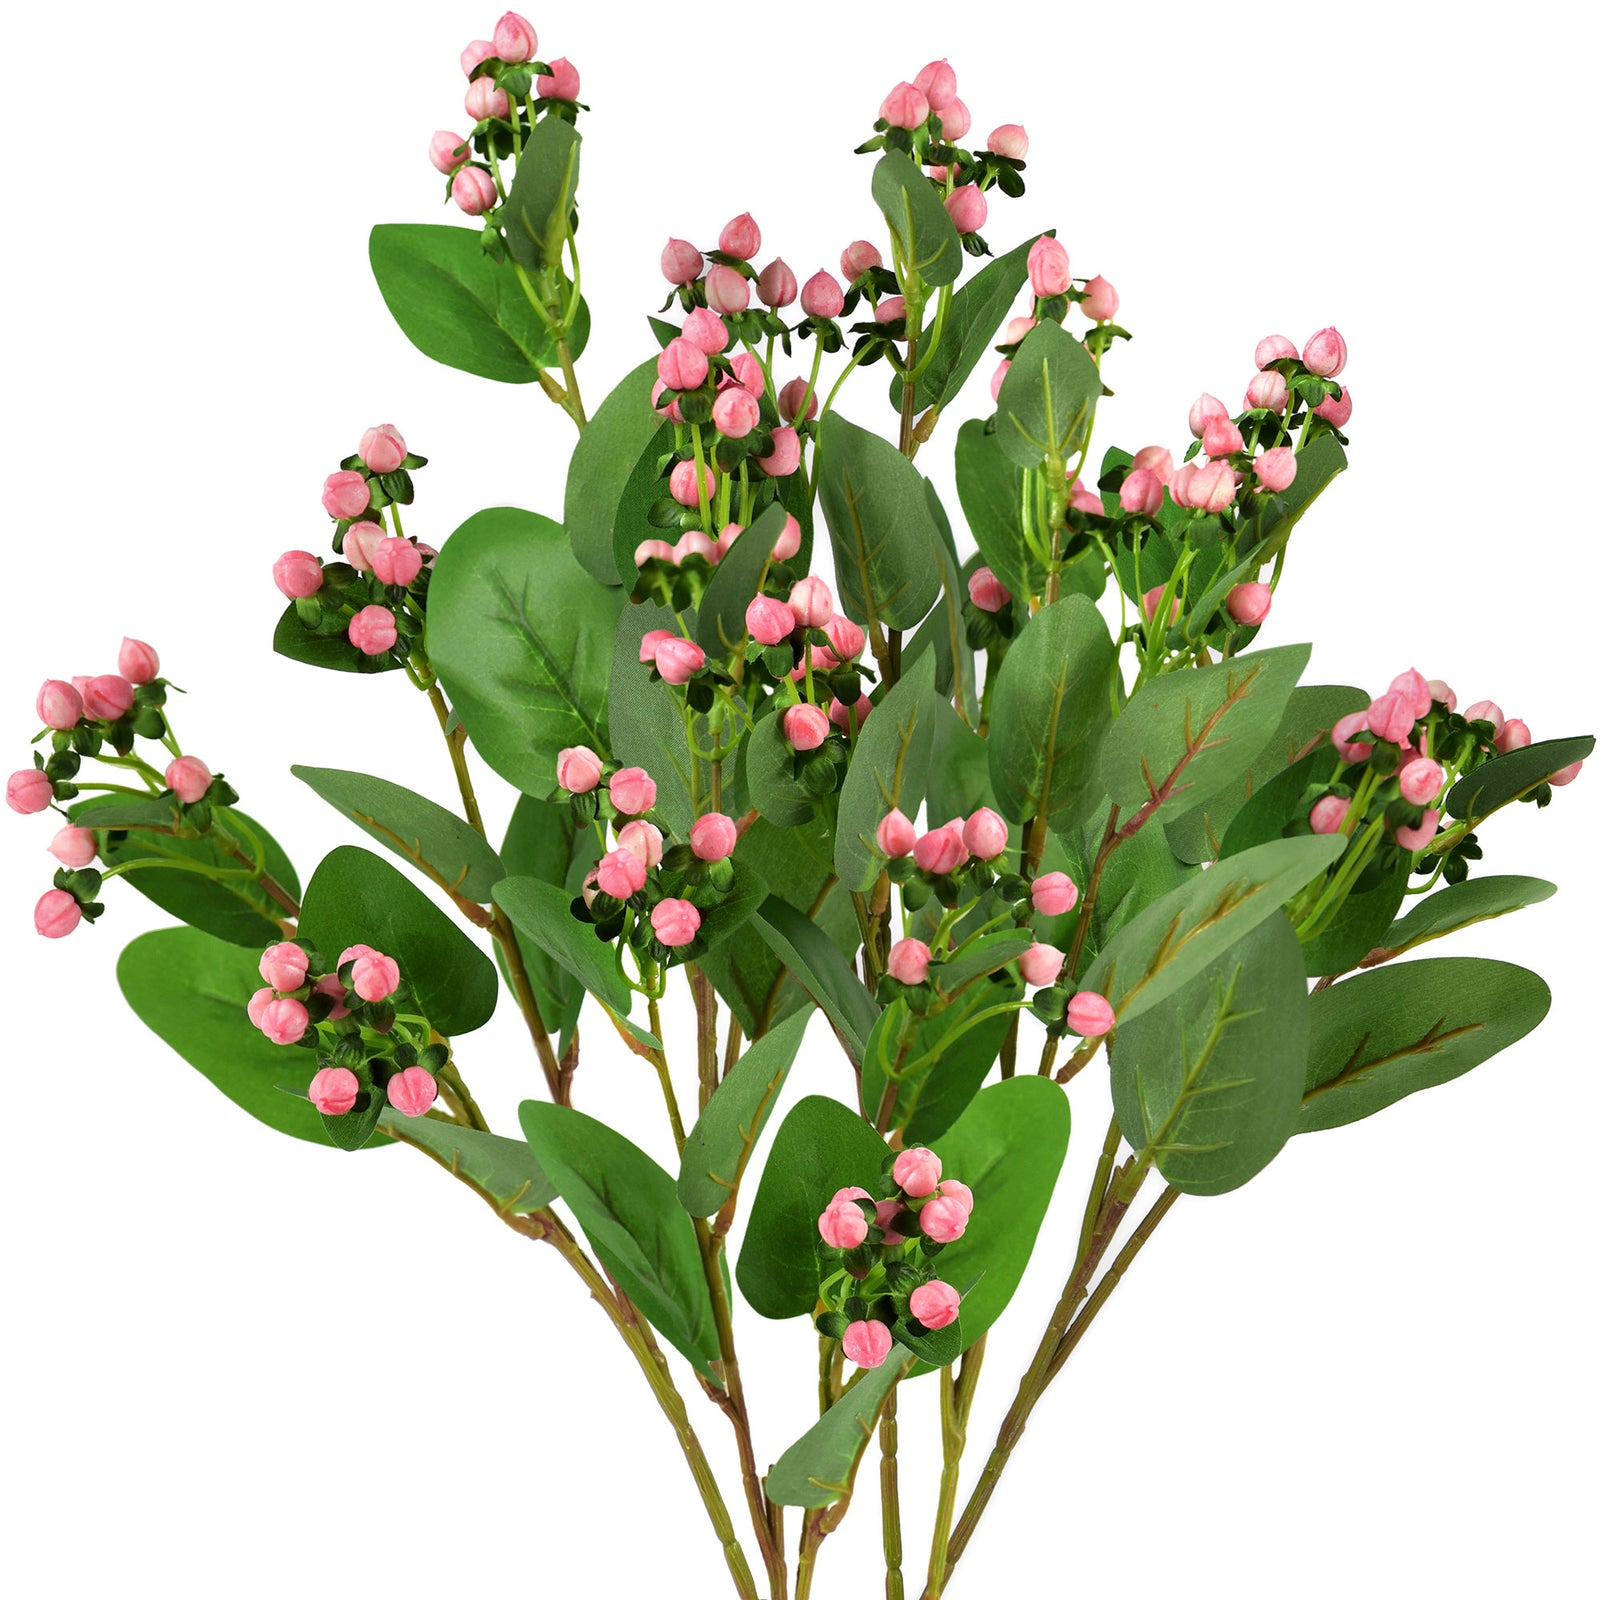 6 Bunches Sea Pink Artificial Hypericum Flower Berries, Long Stem Greenery Fillers for Floral Arrangements